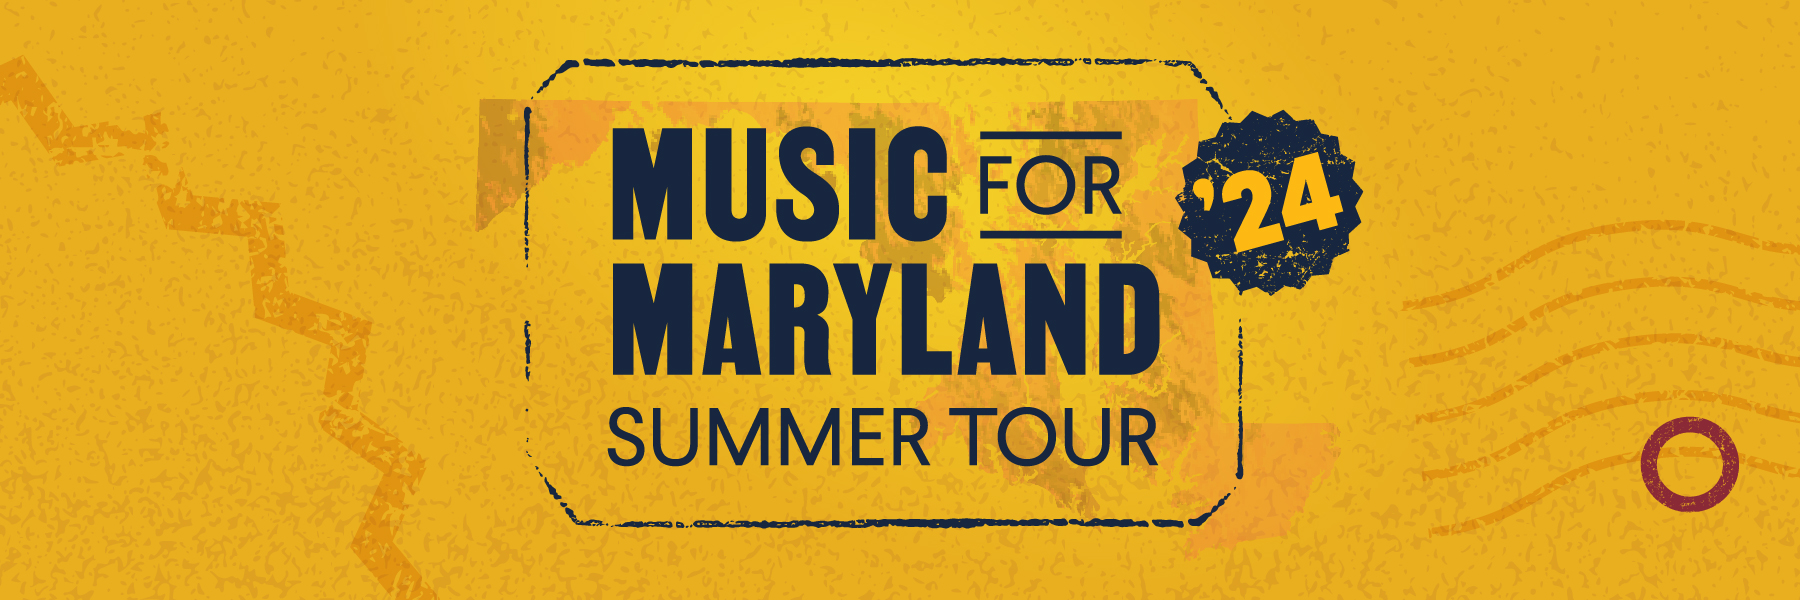 Featured image for “Baltimore Symphony Orchestra’s Music for Maryland Tour Returns with Eight Statewide Summer Performances”